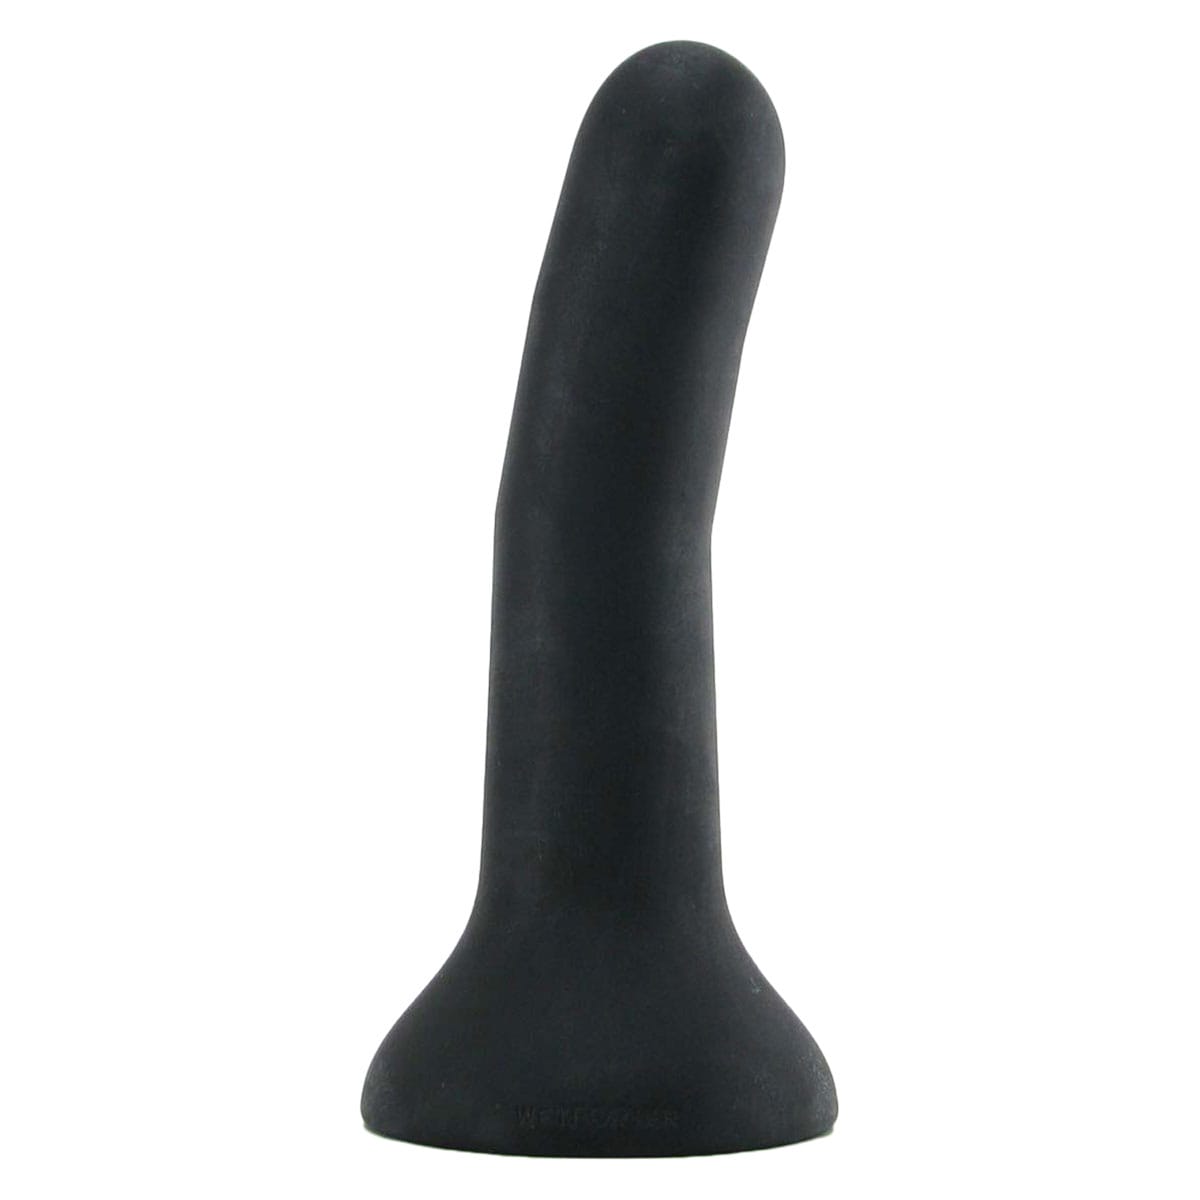 Buy Wet for Her Five Jules   Large   Black Noir 7.25 long and 1.67 thick dildo made by Wet For Her.